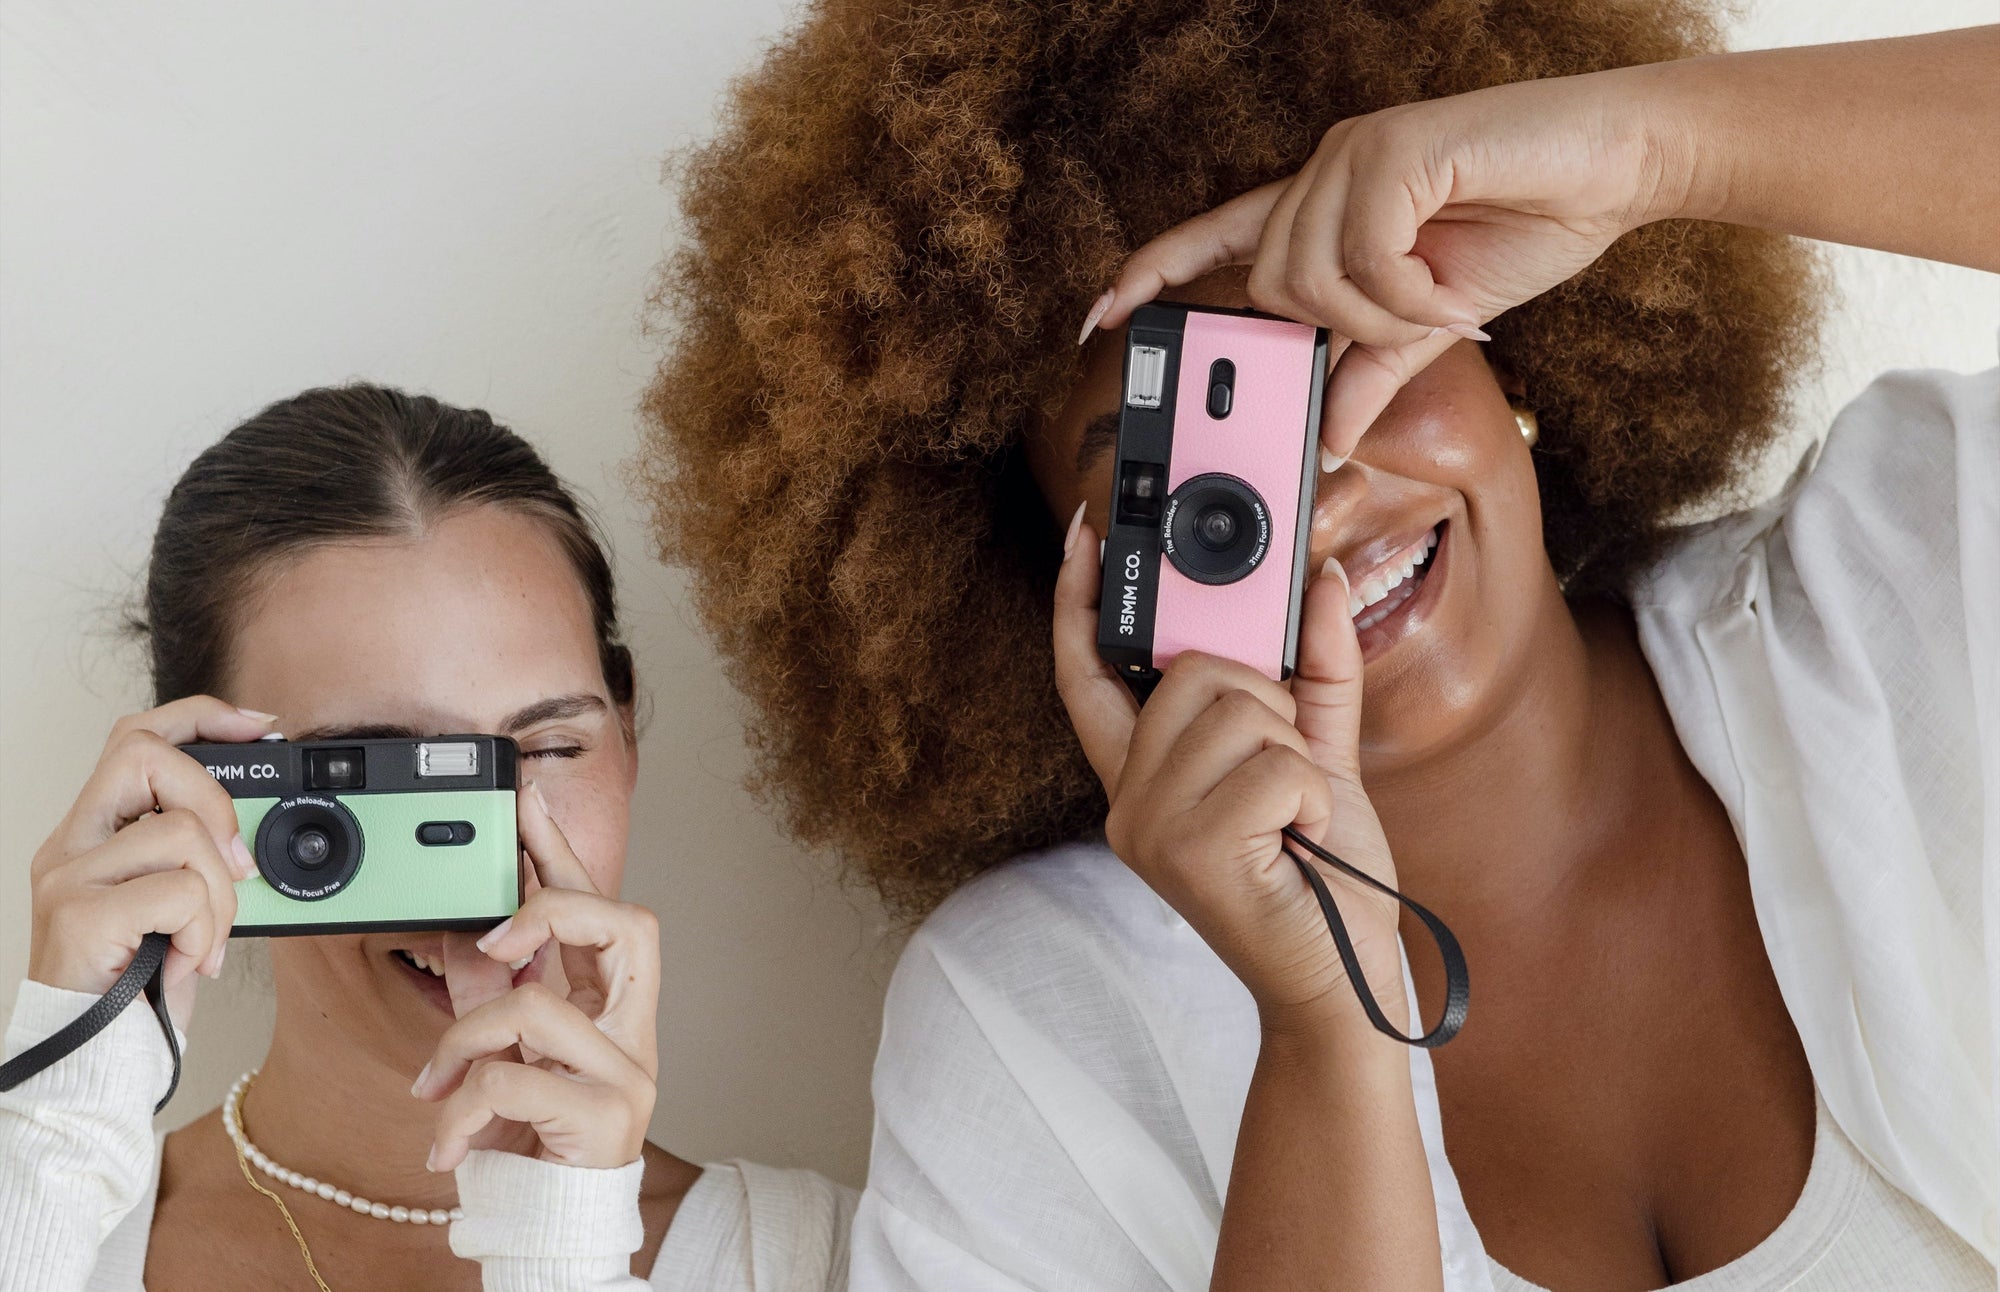 Two women are taking pictures of each other with polaroid cameras.